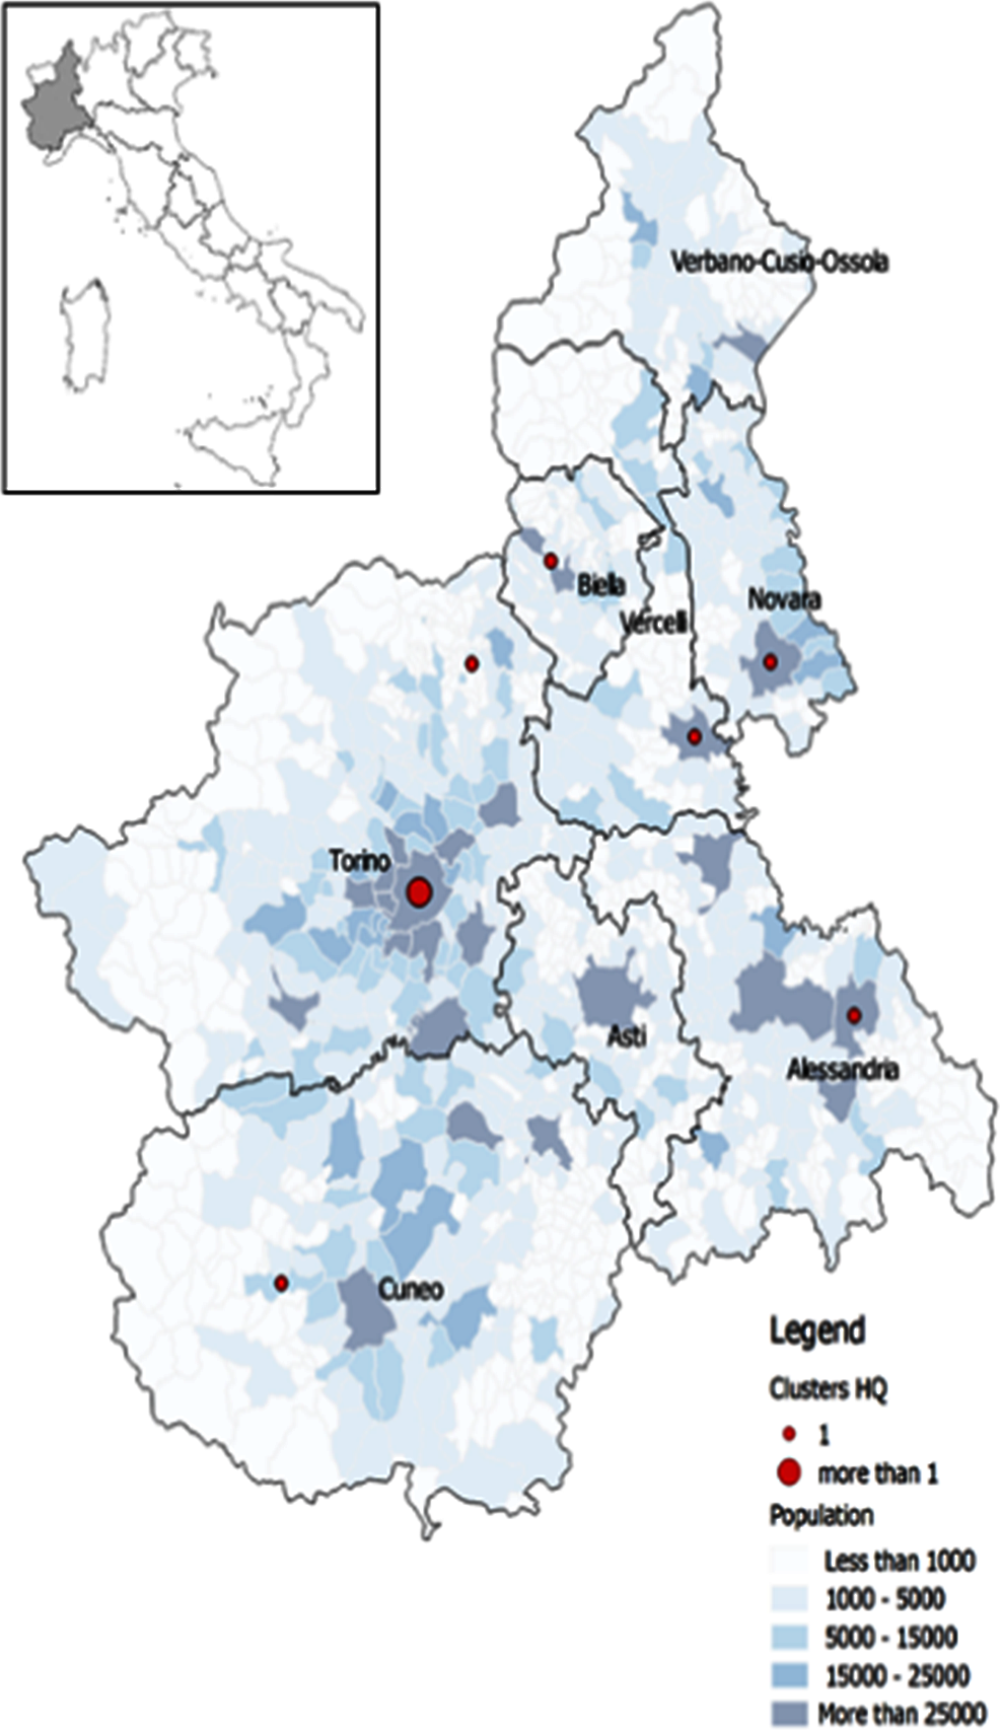 Figure 4.2. The location of innovation cluster headquarters in Piedmont